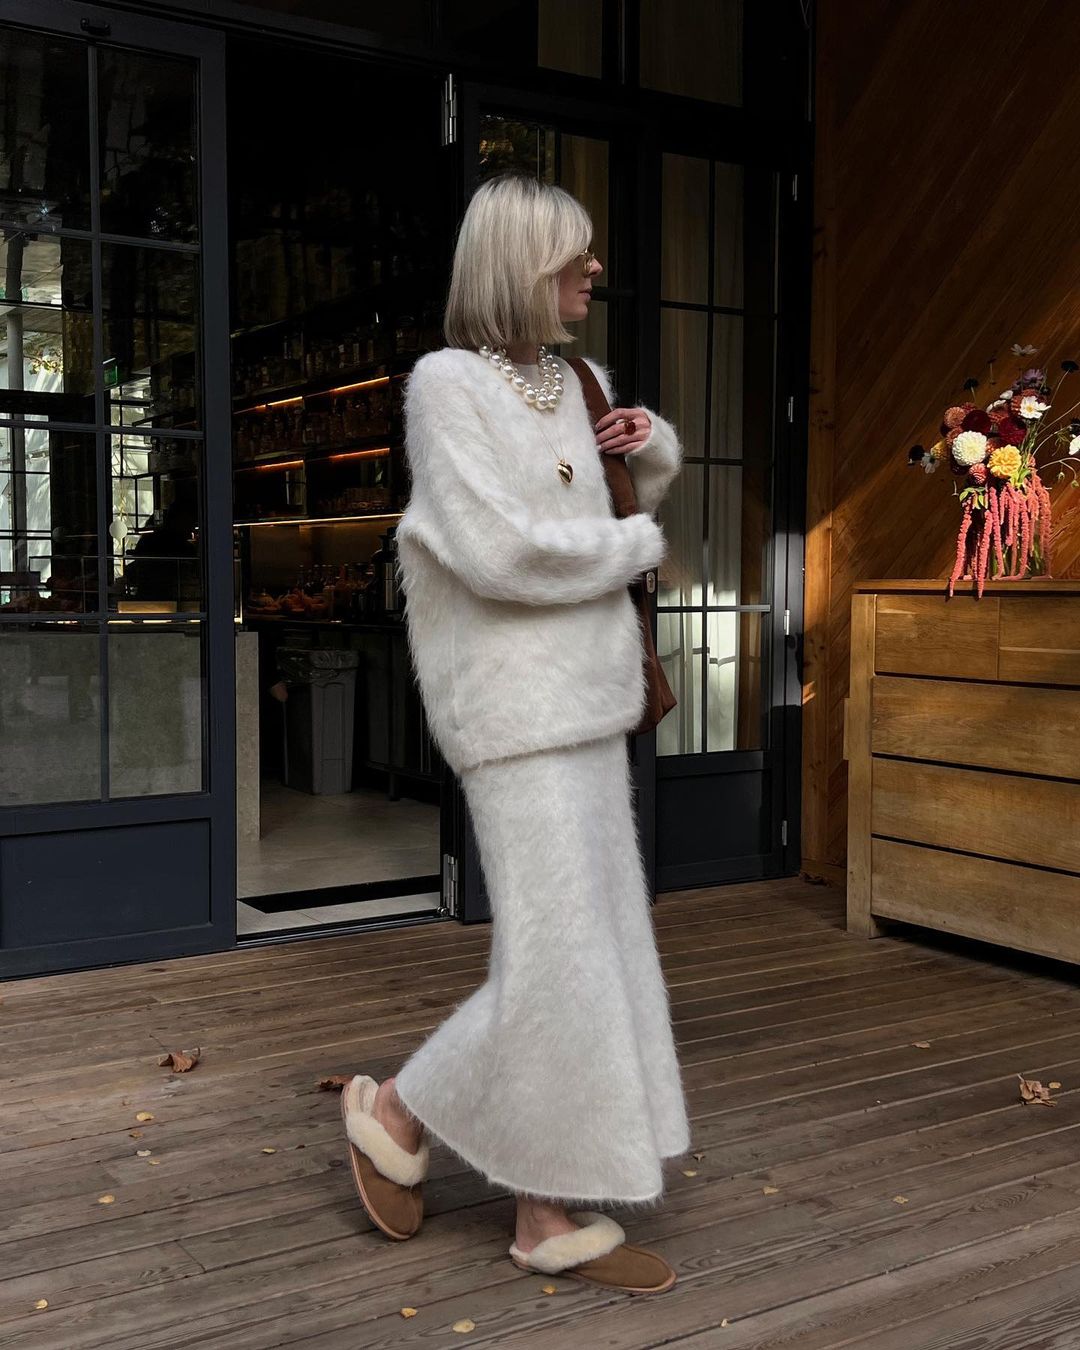 Warm Up With These 10 Vanilla Girl Winter Outfits